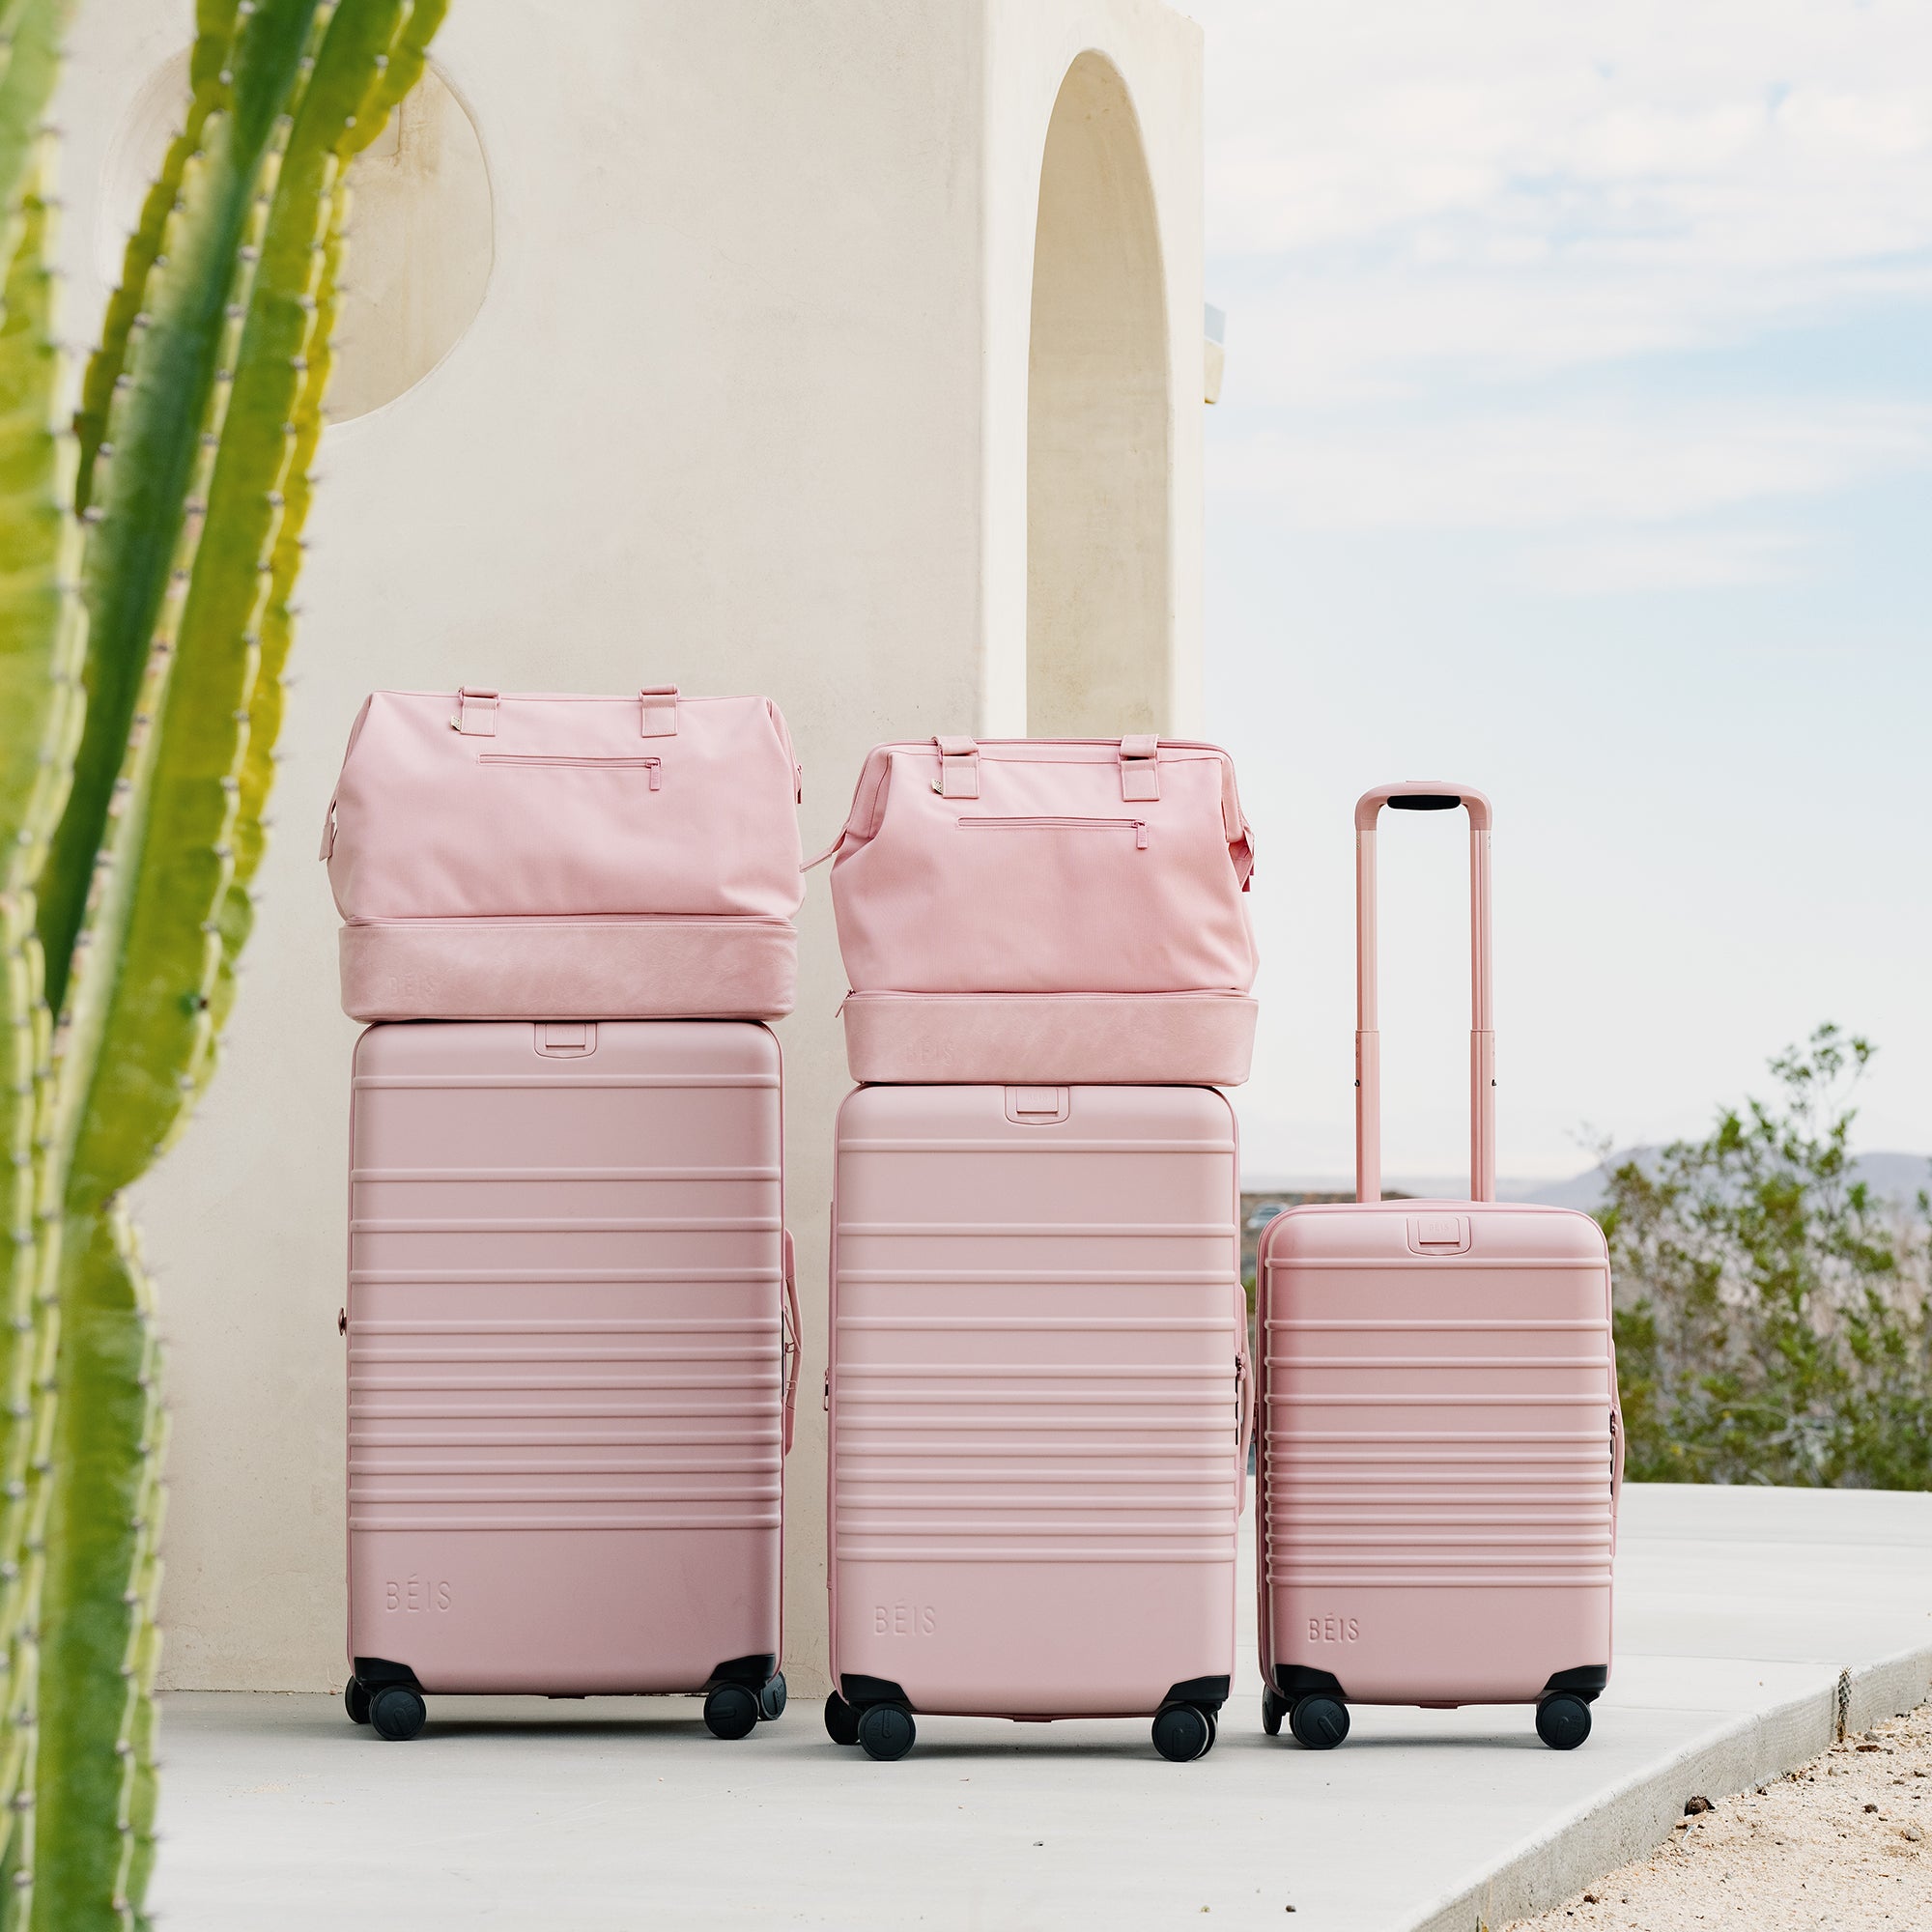 BÉIS 'The Carry-On Roller' in Atlas Pink - Pink 21 Carry On Roller u0026 Hand  Luggage | BÉIS Travel CA